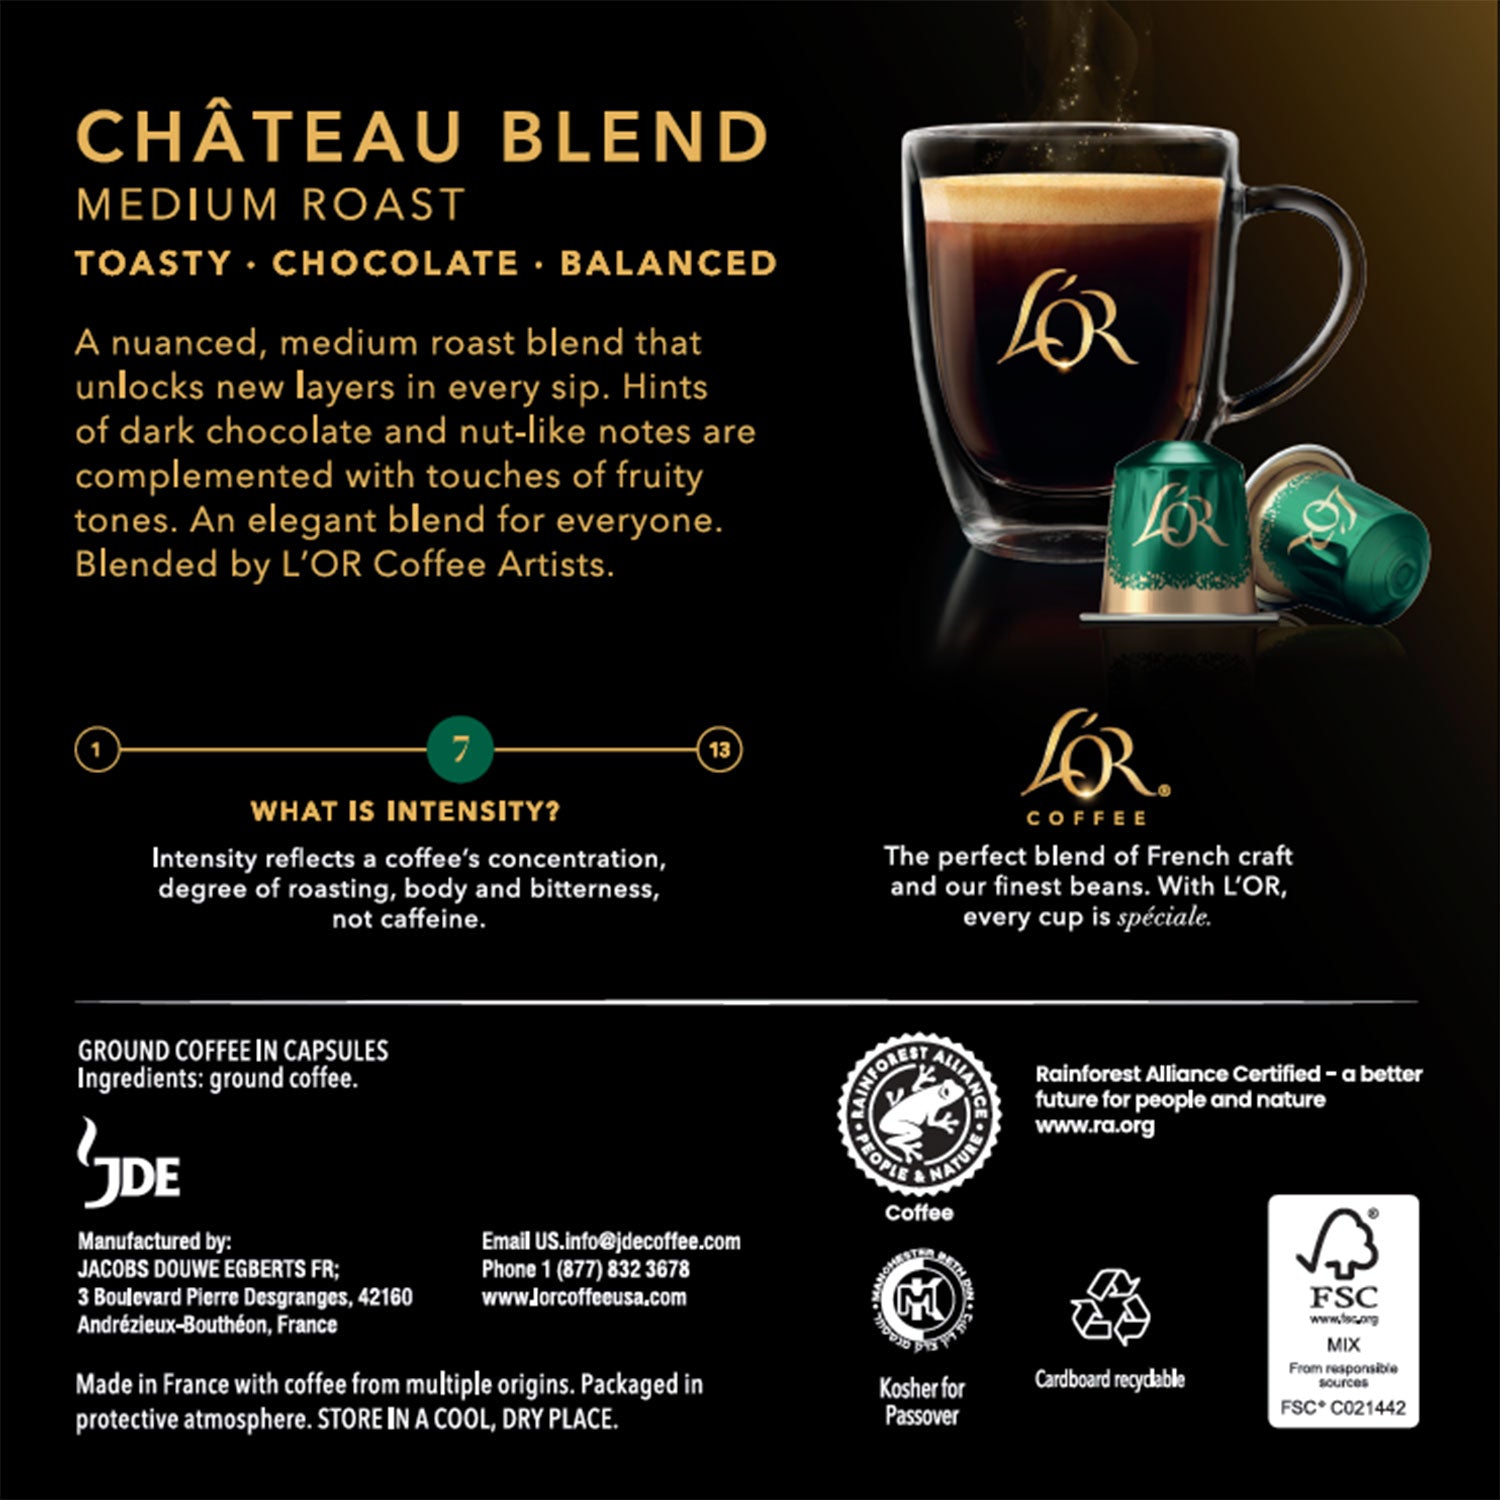 Back of the Chateau Blend box.